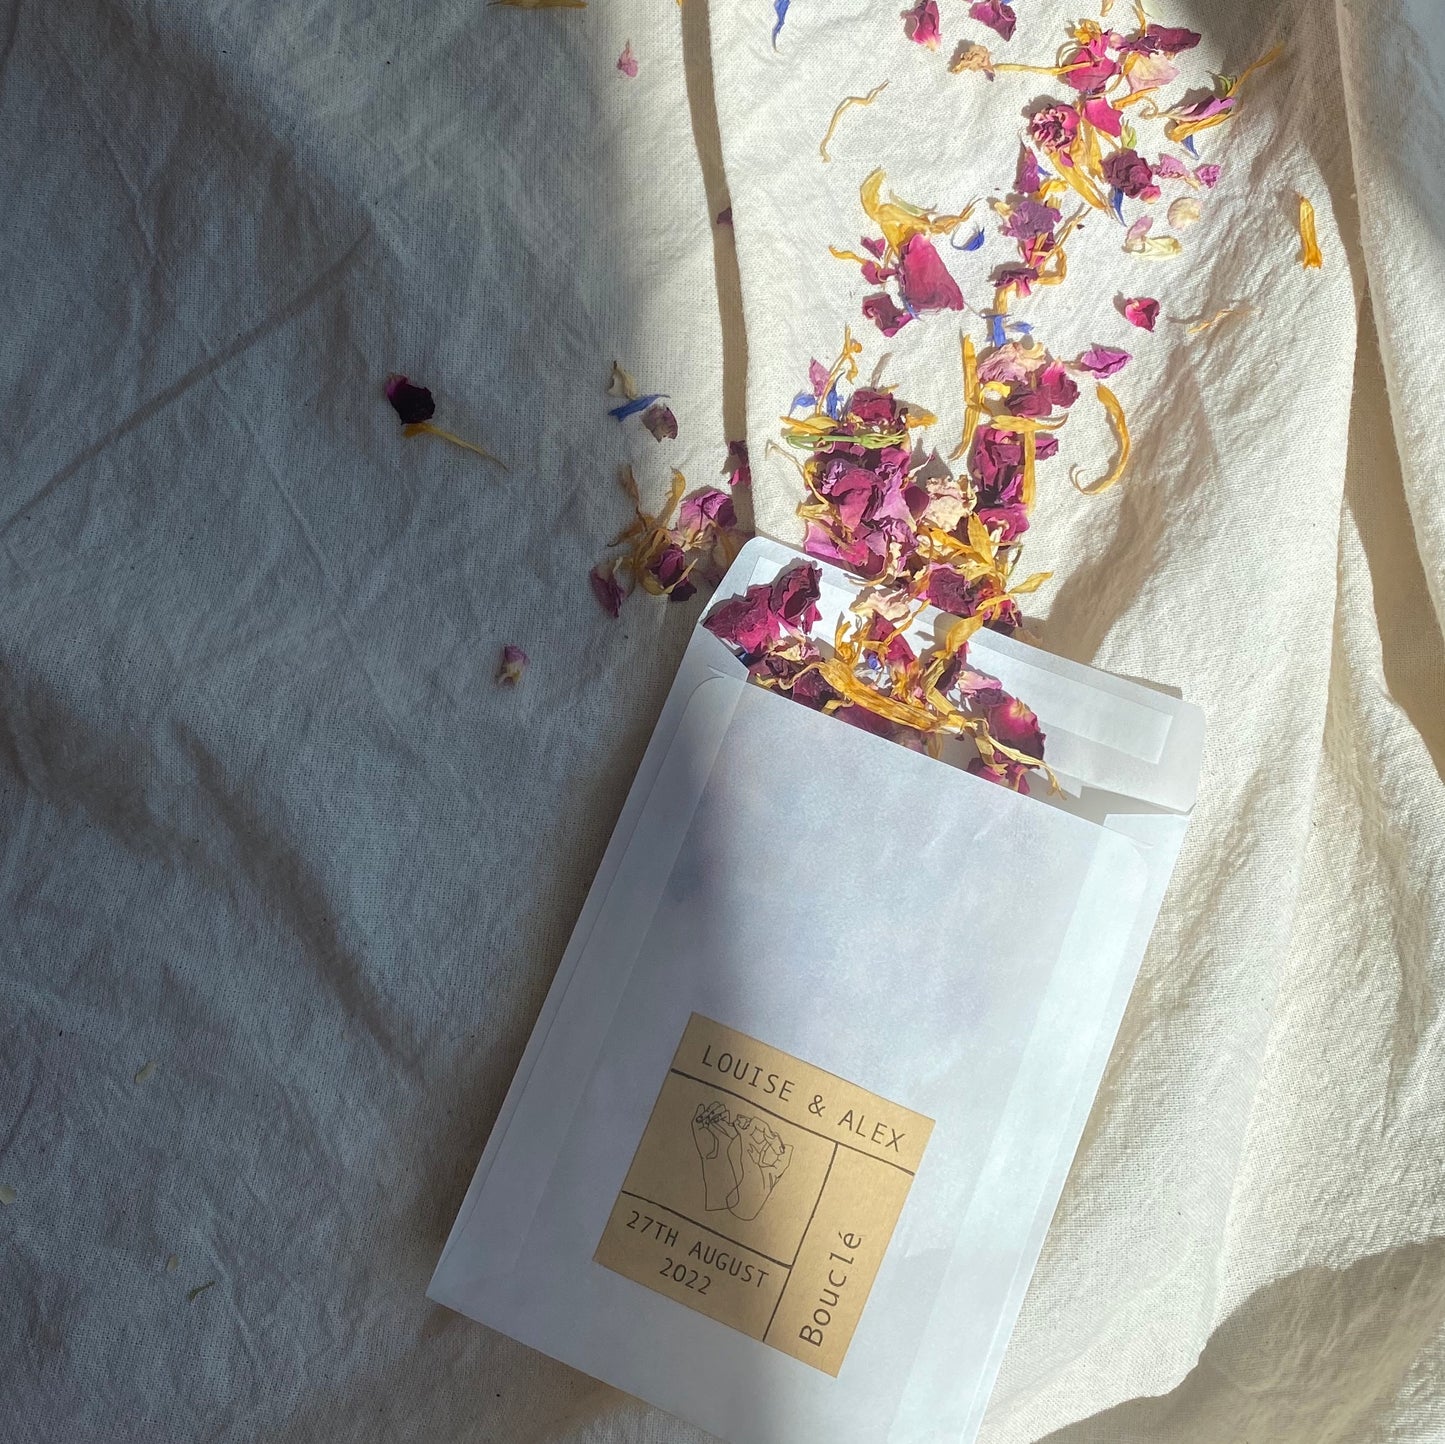 Dried real petal flower biodegradable natural wedding confetti pouch with a personalised label ideal for wedding styling. The petals are multicolour pink, yellow, purple and cream.